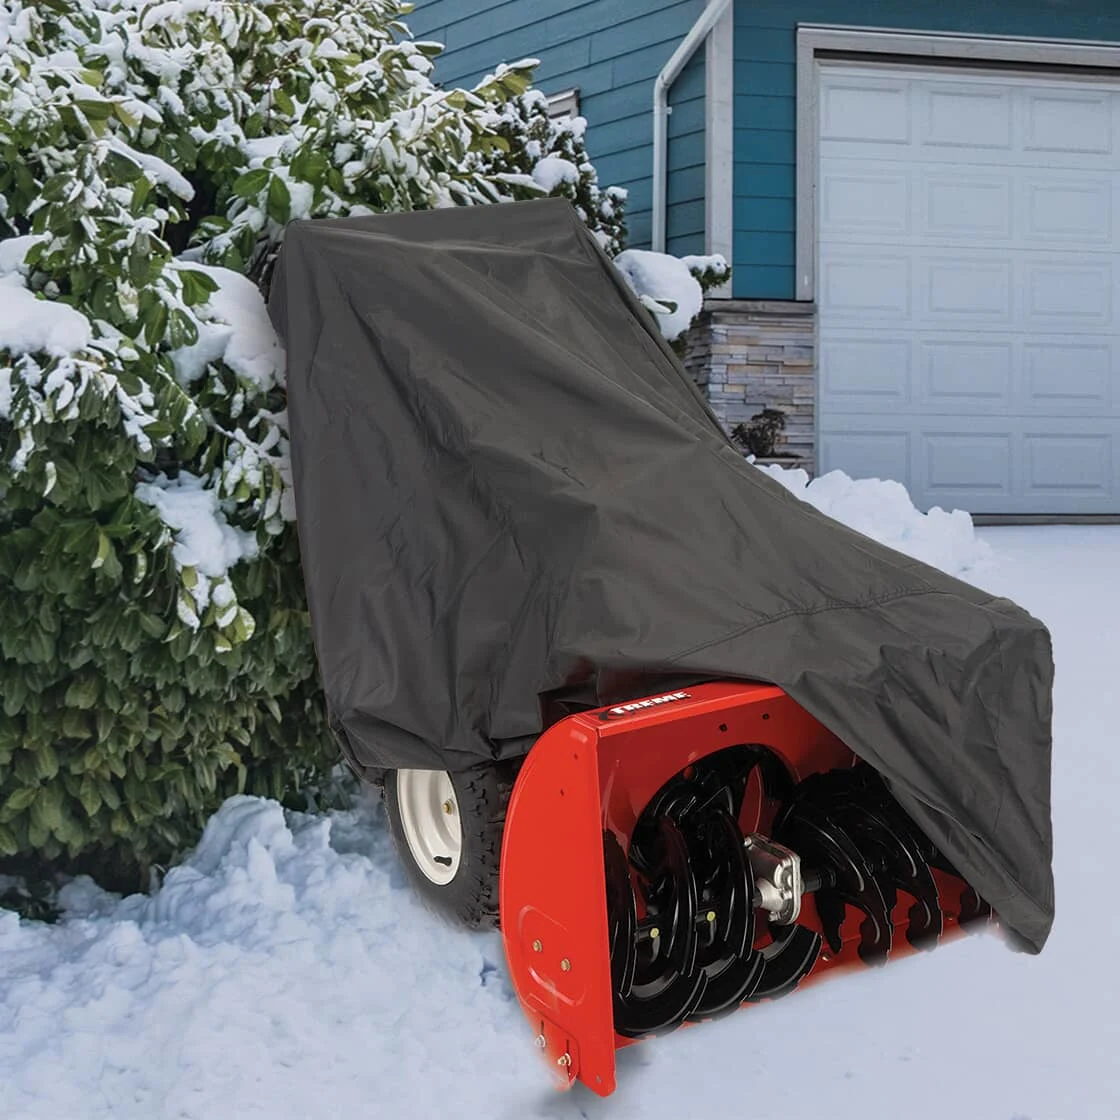 Here’s How to Keep Your Snow Blower Running Great | Home Hardware